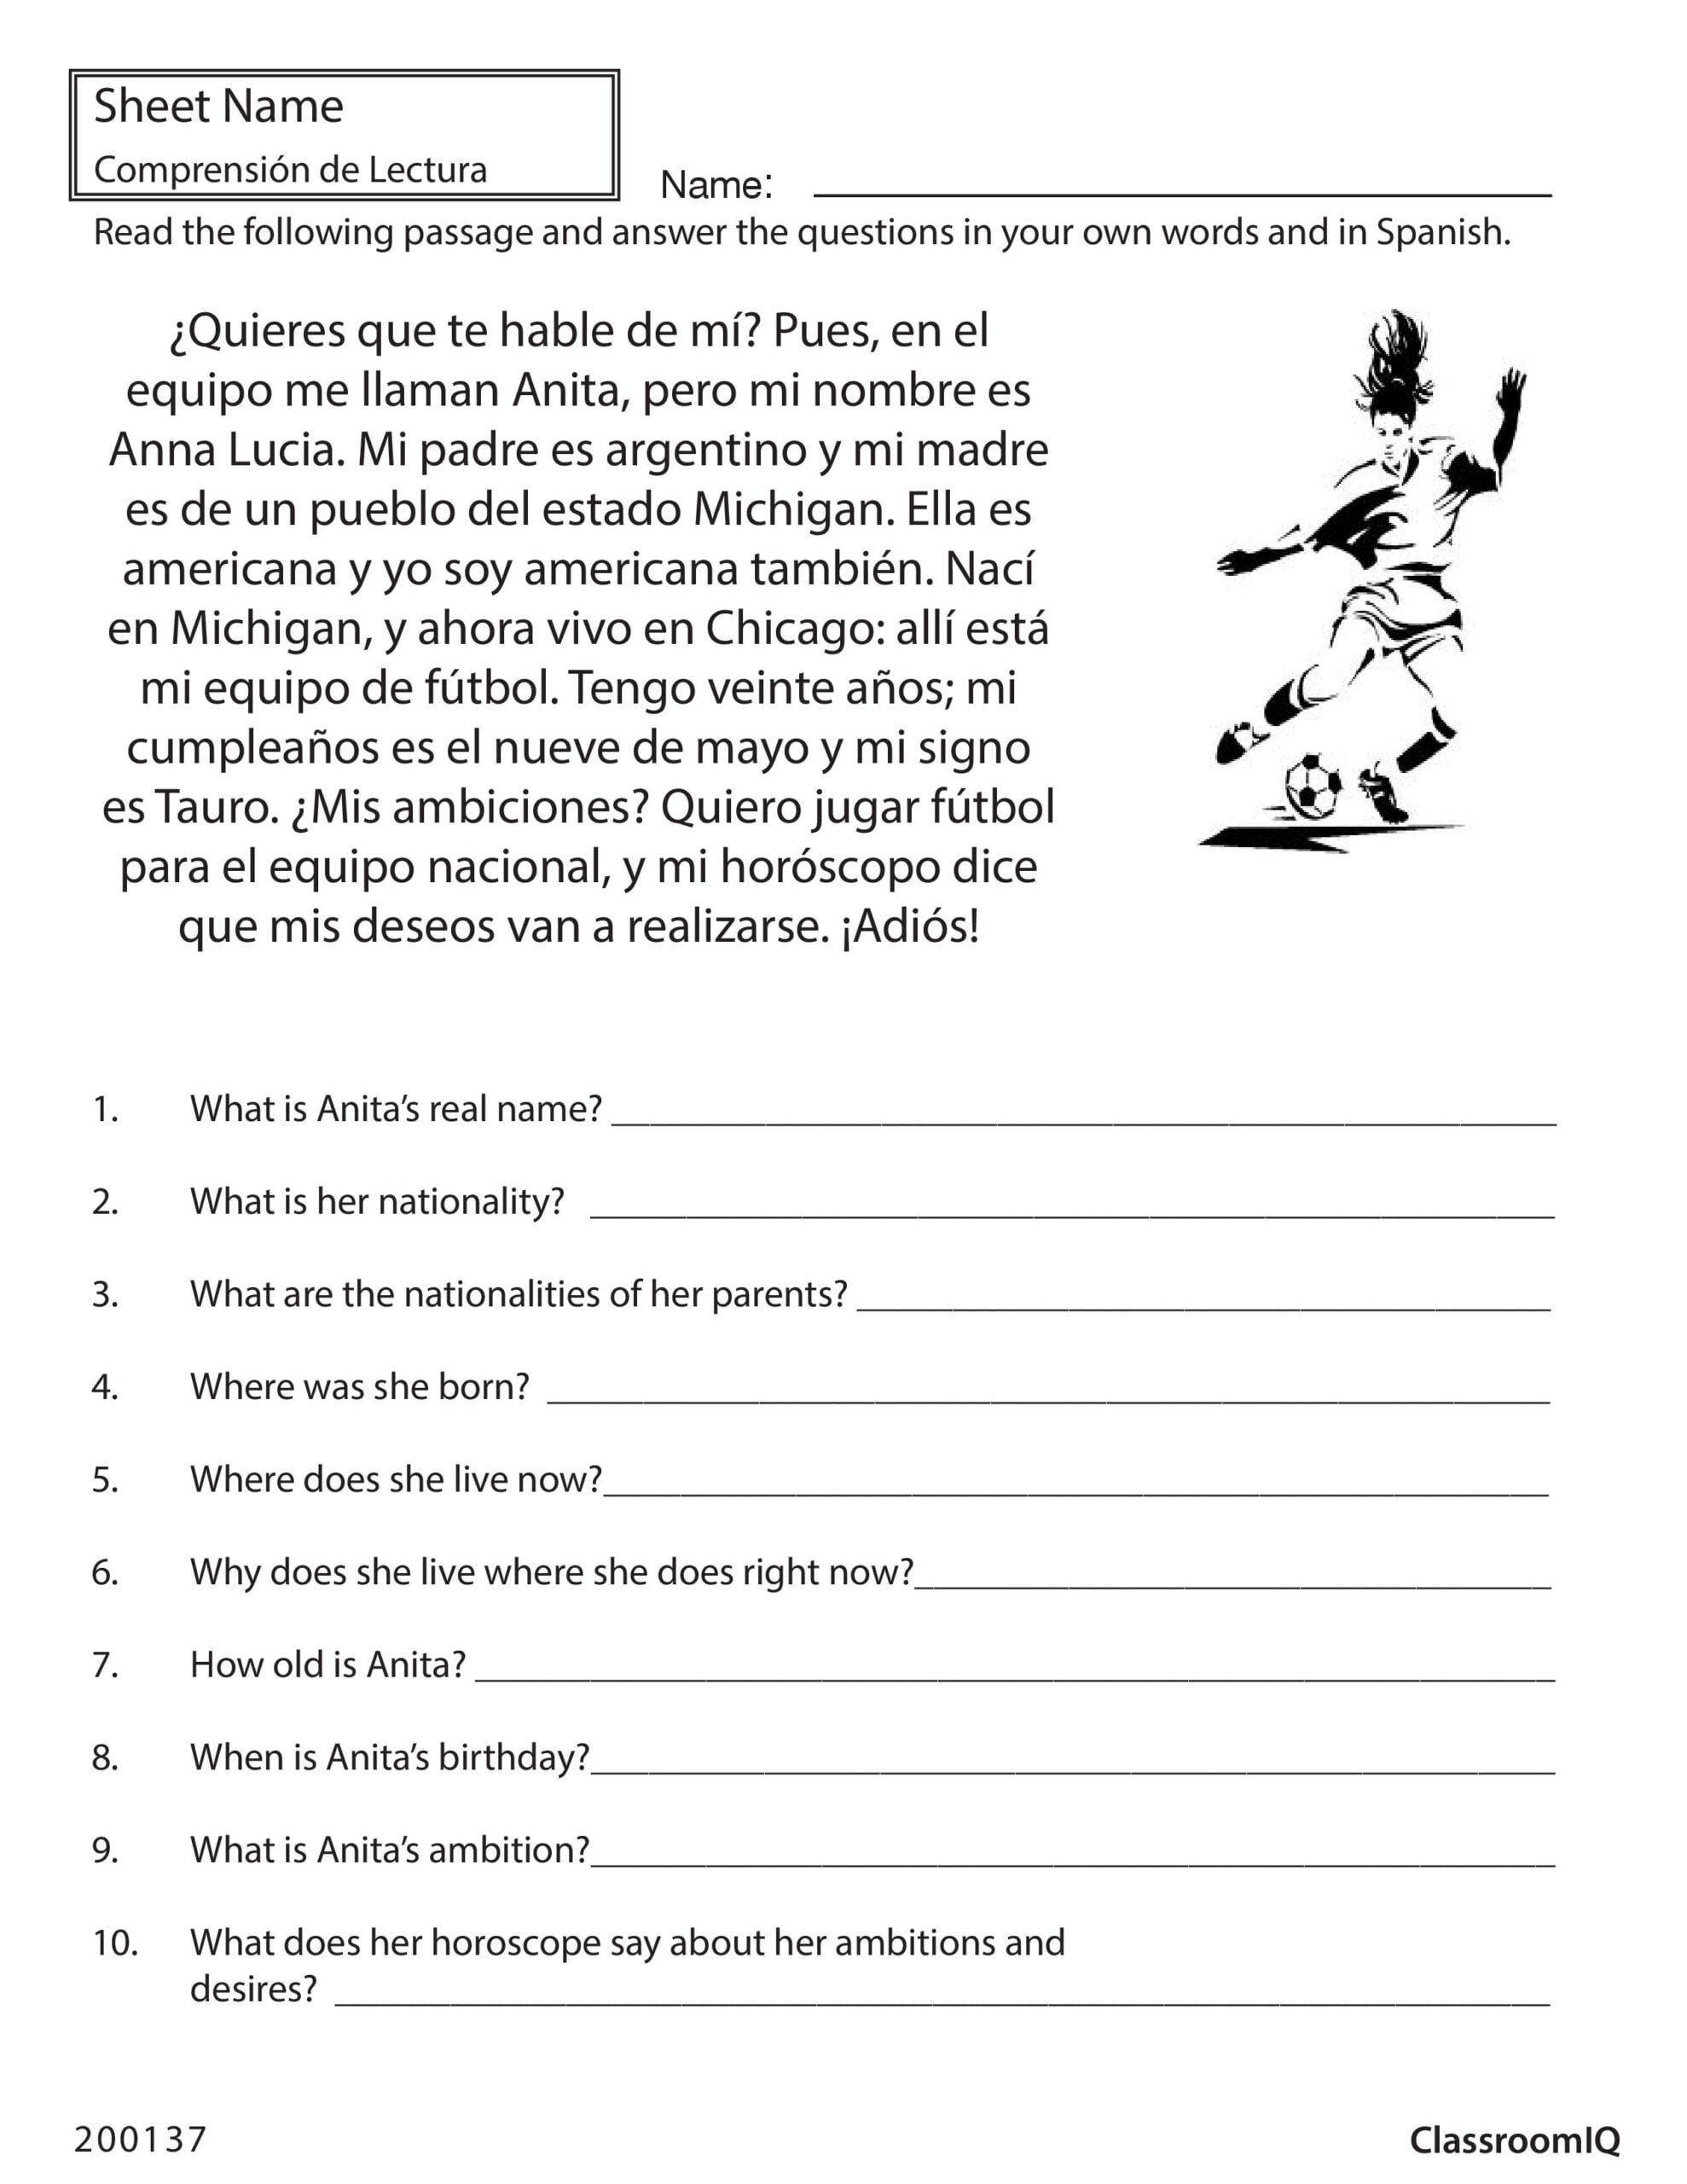 Read Spanish Passage And Answer Questions In English spanishworksheet newteacher Comprehension Worksheets Reading Comprehension Spanish Reading Comprehension